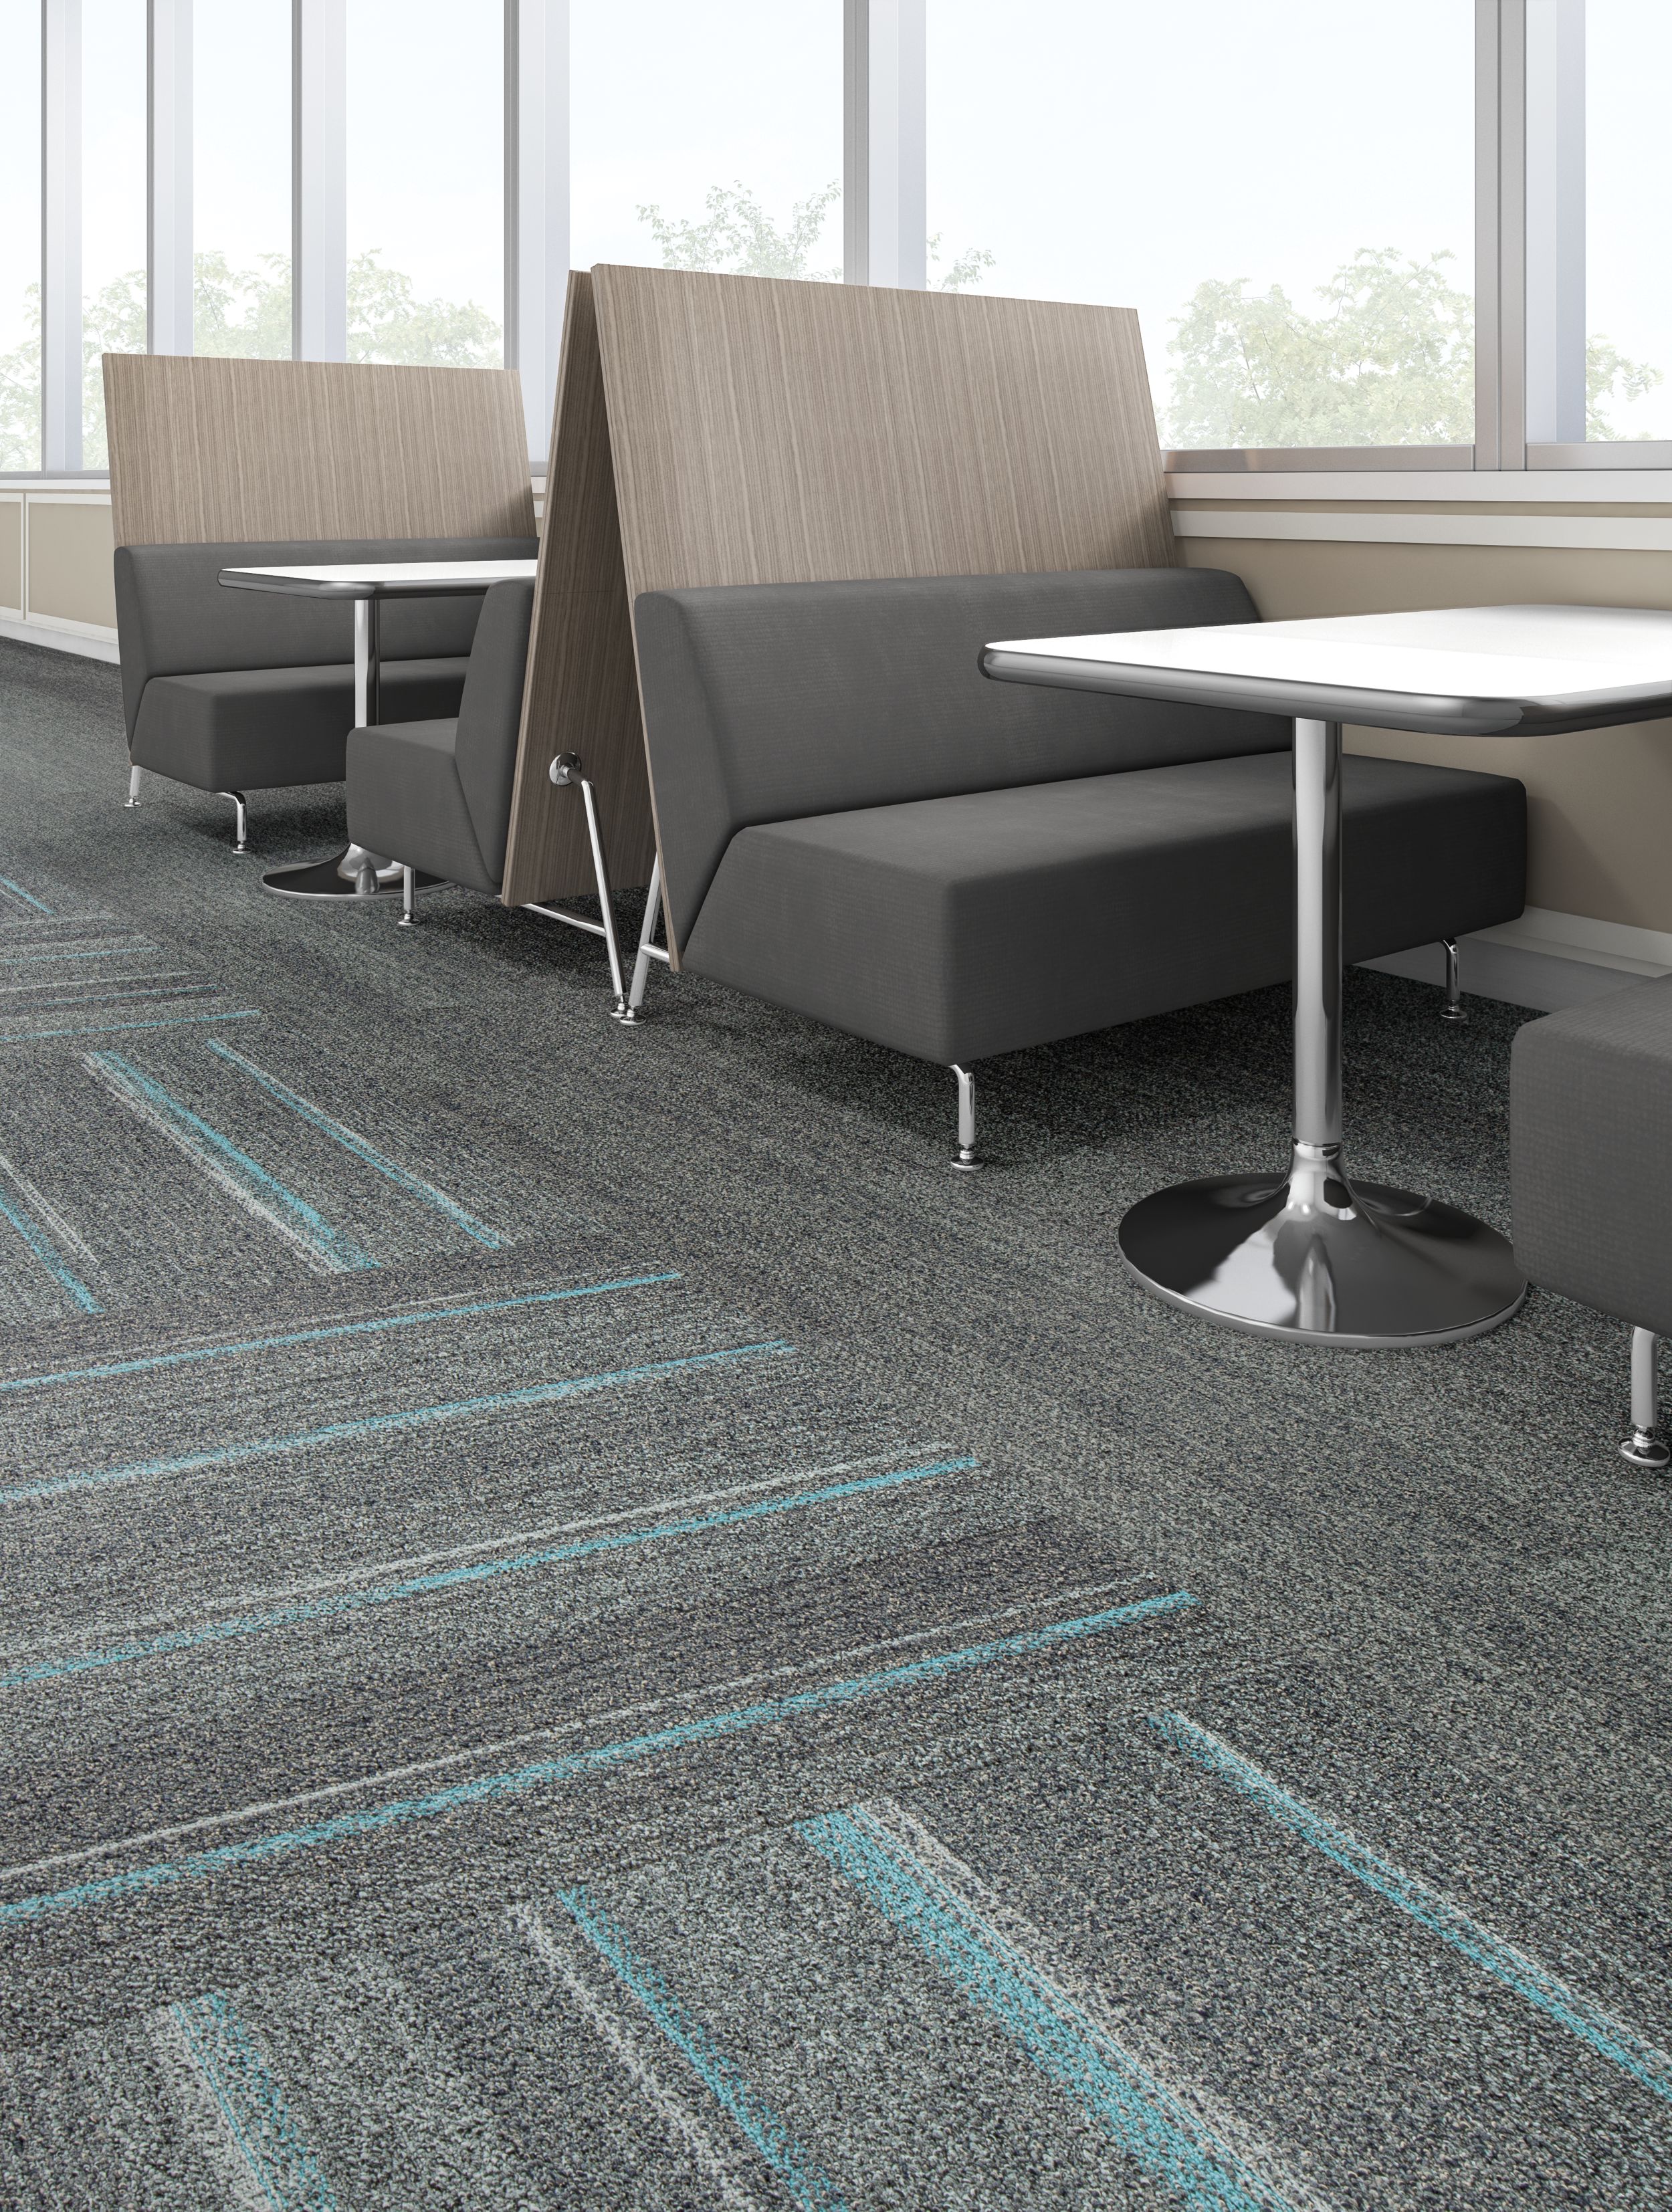 Interface Harmonize and Ground Waves plank carpet tile in cafe area with gray booths imagen número 3